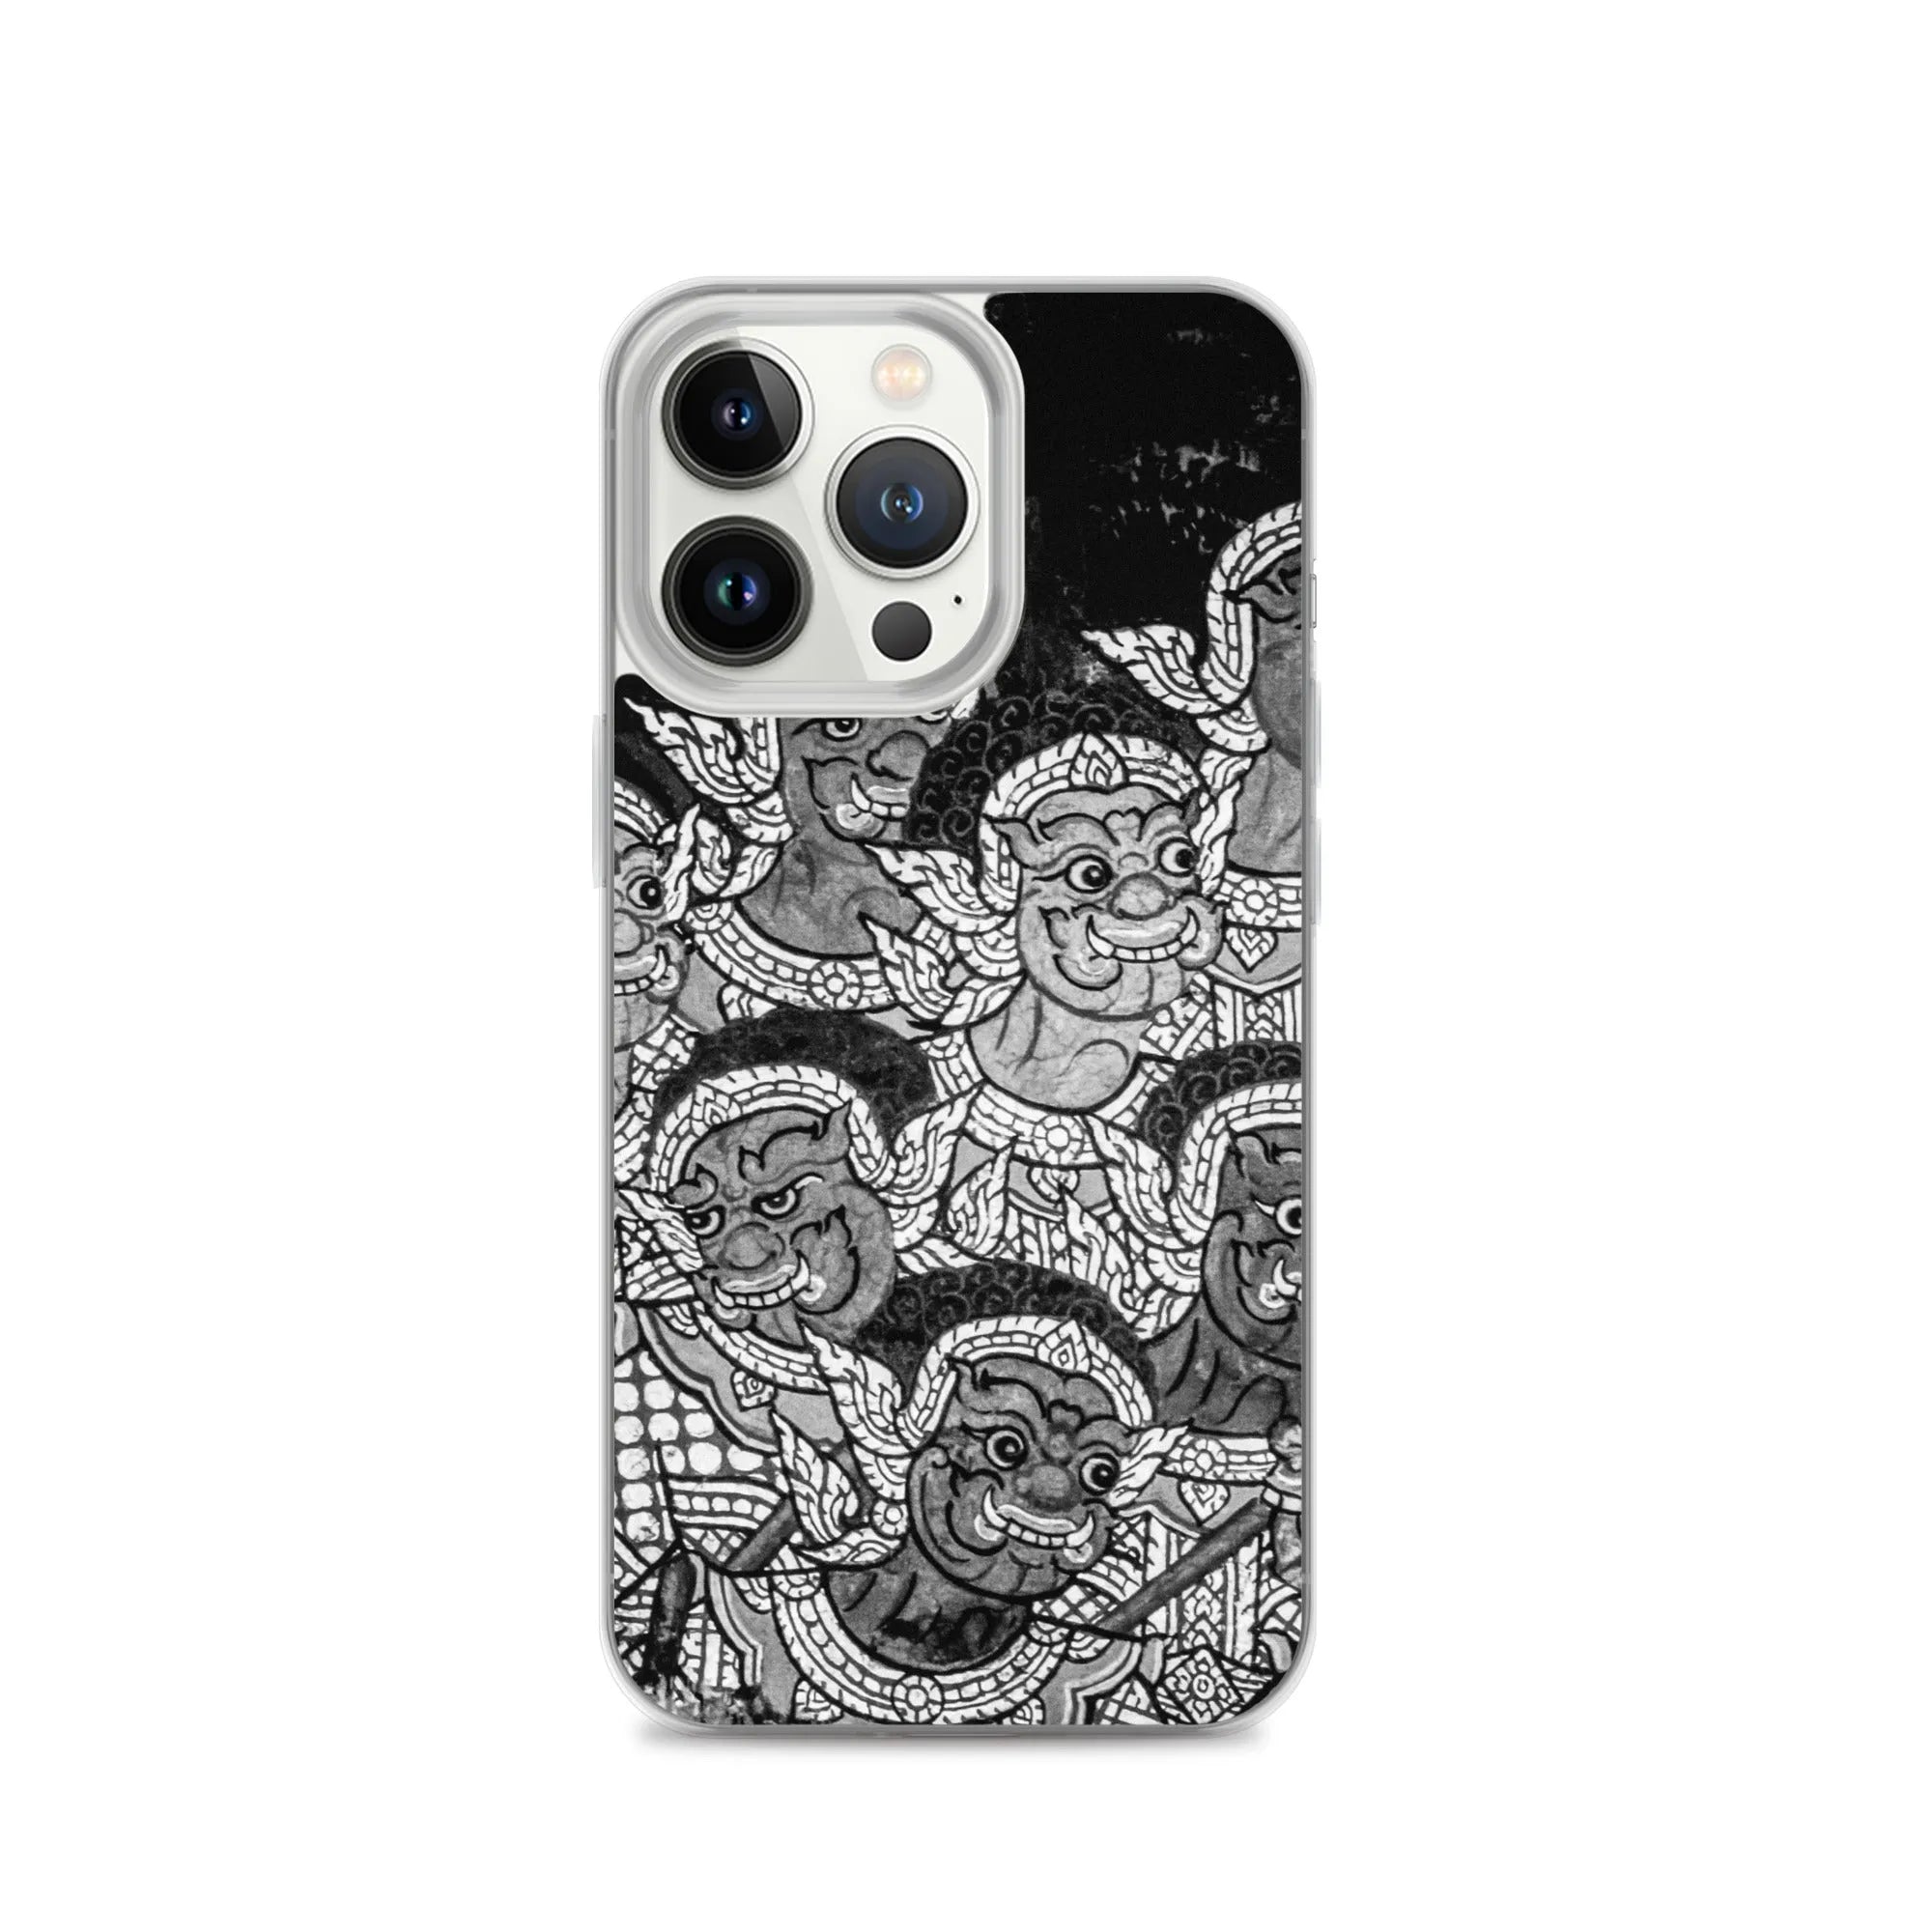 Babes In The Woods - Designer Travels Art Iphone Case - black And White - Iphone 13 Pro - Mobile Phone Cases